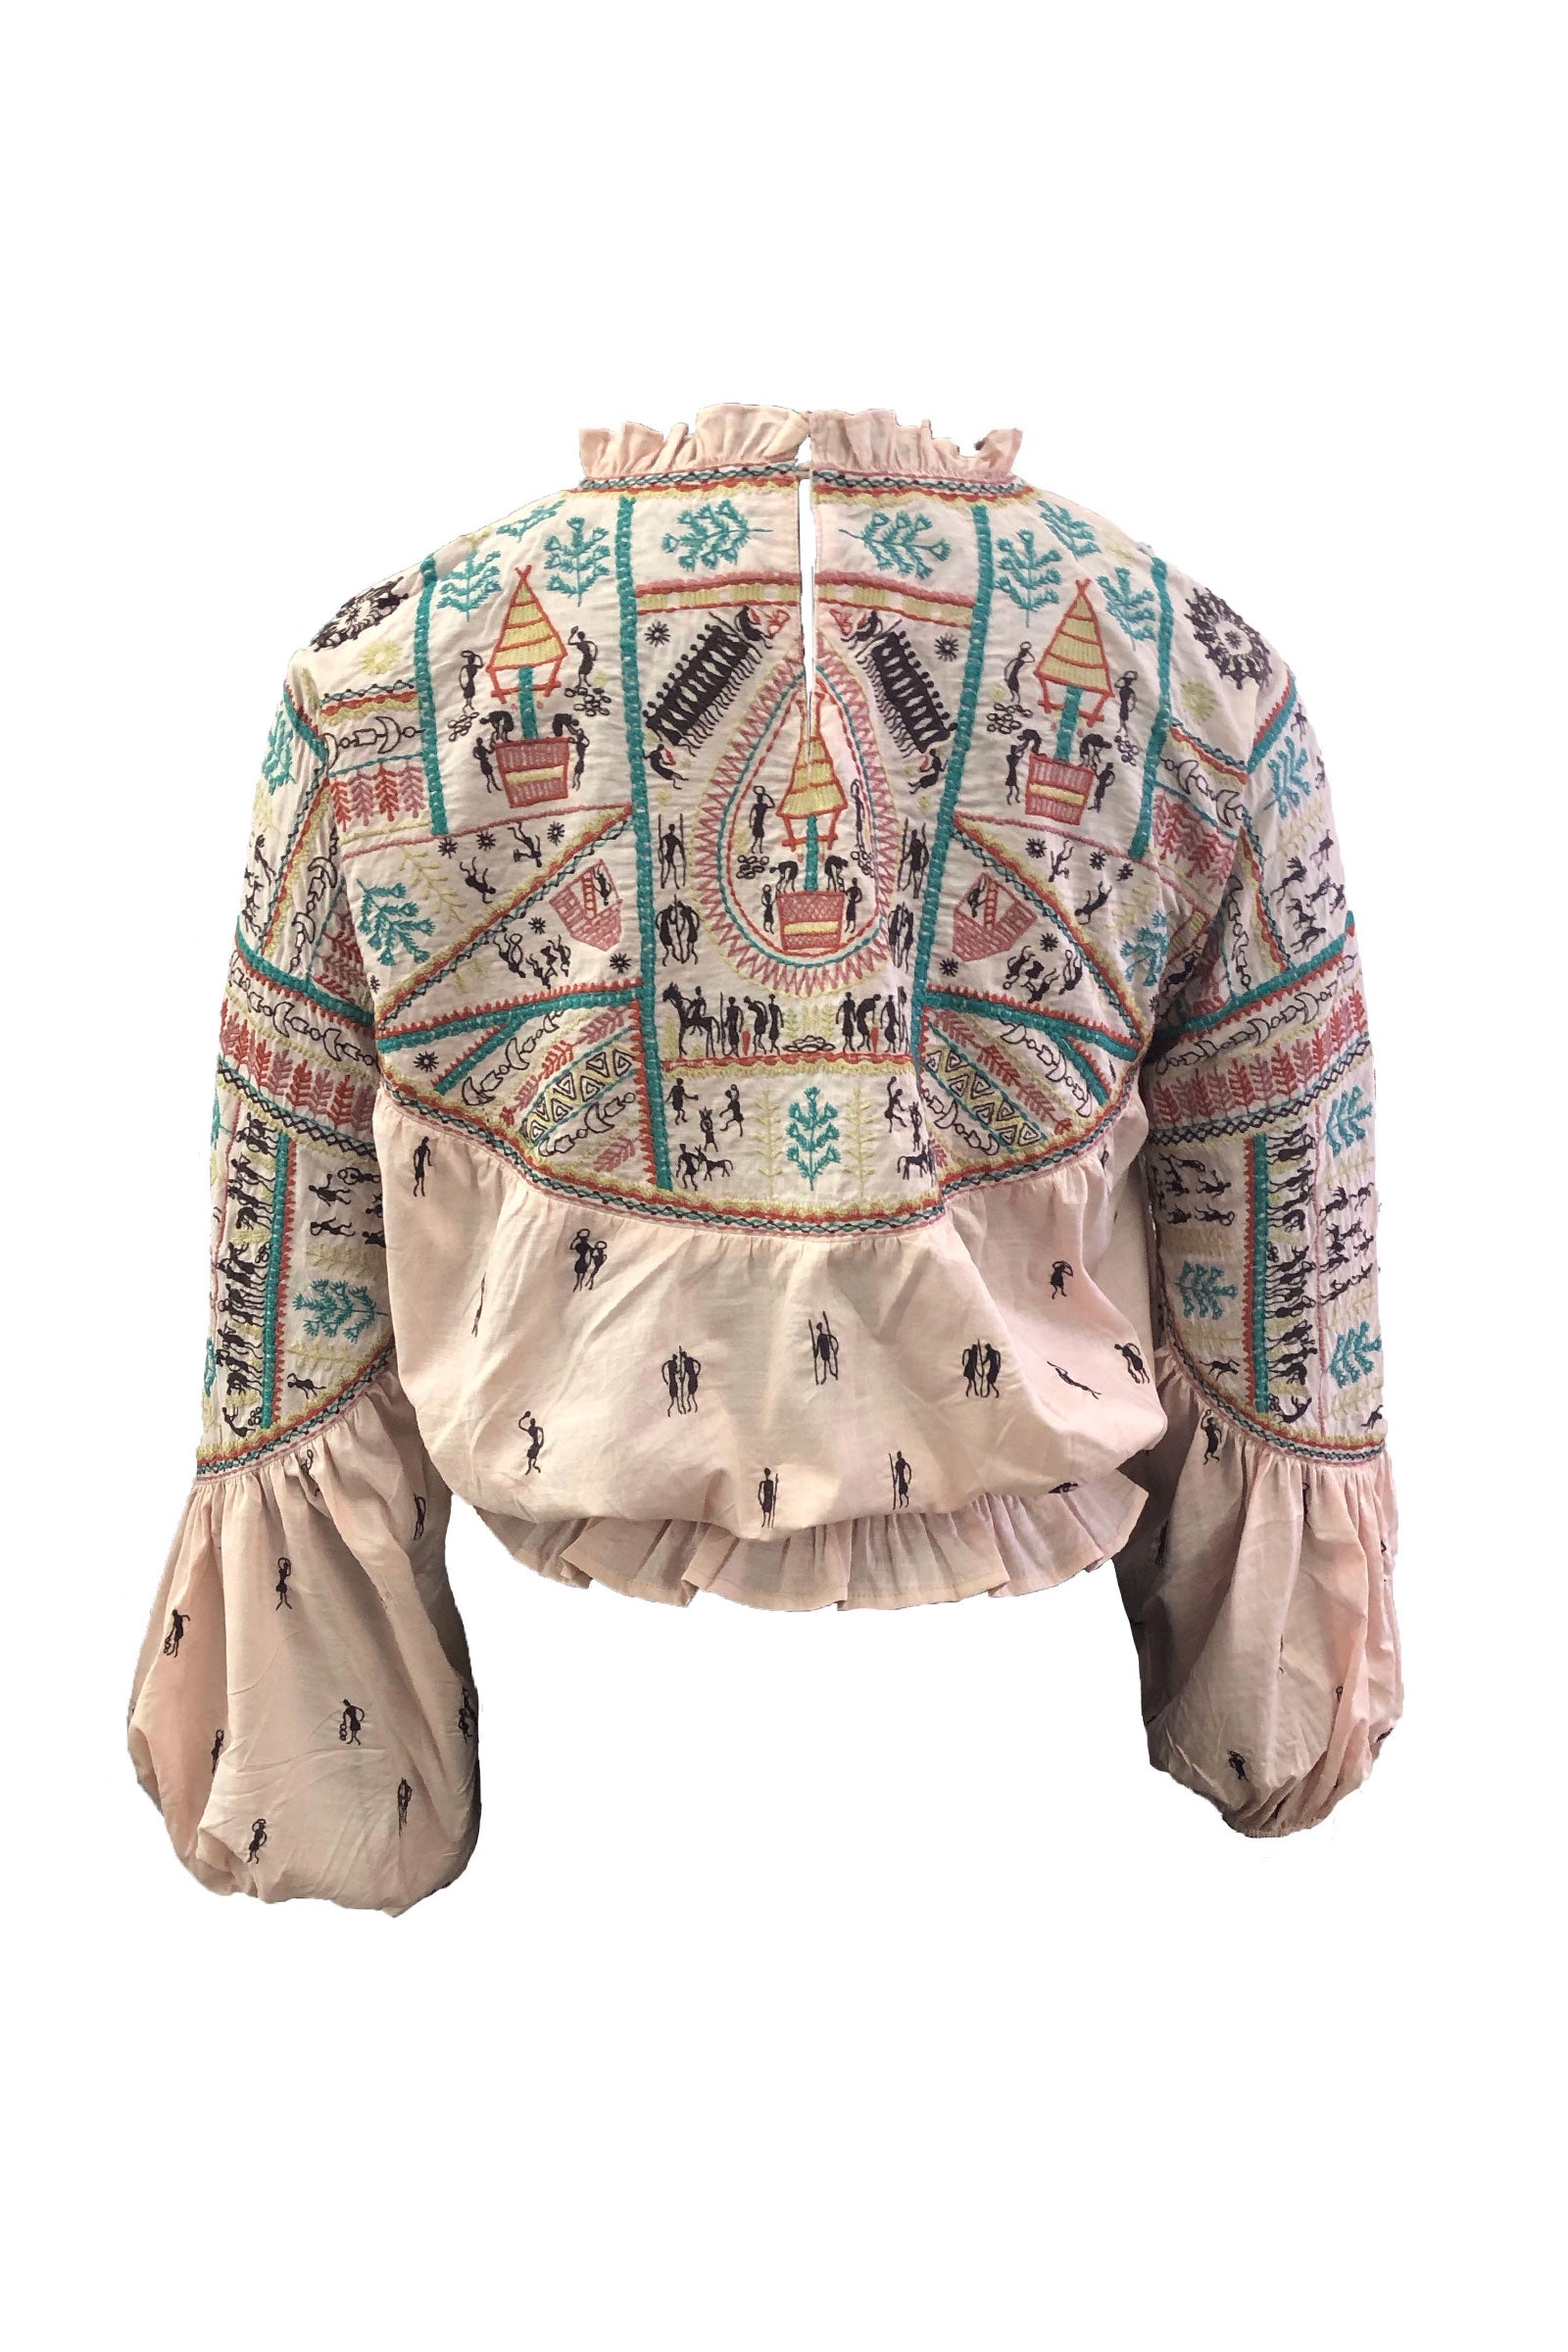 Bohemian Dancing Tribe Embroidered Blouse